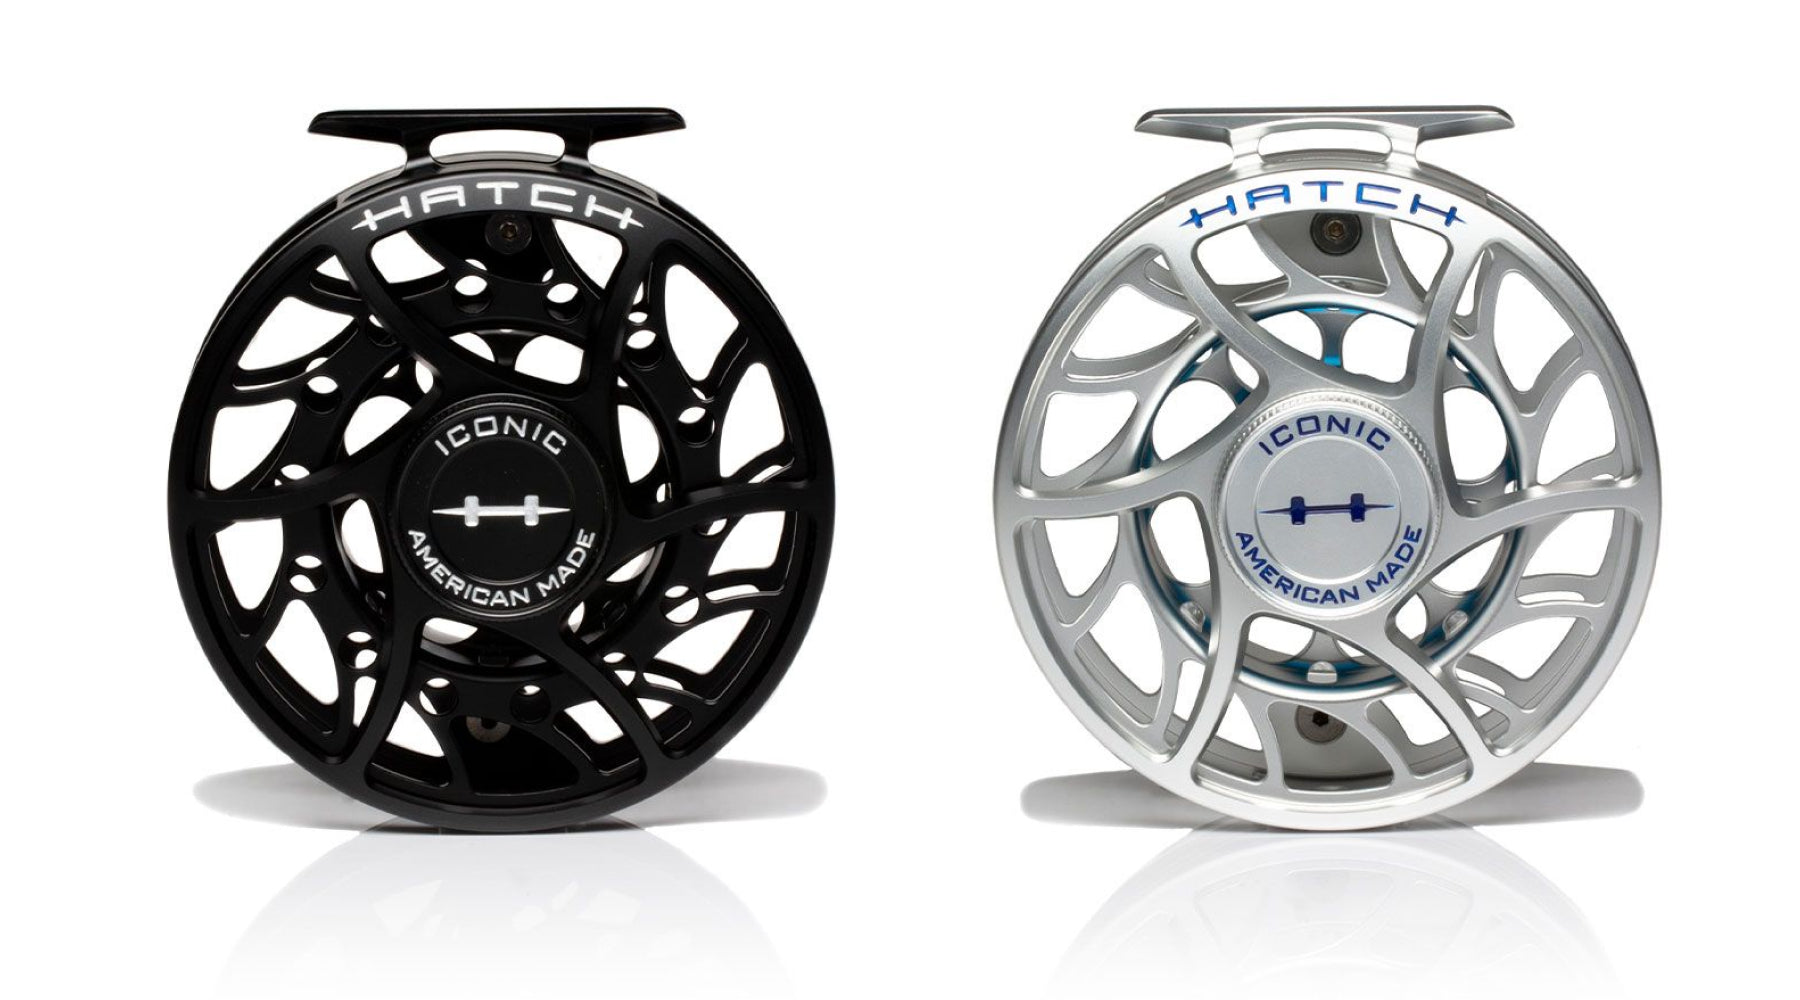 Compleat Gear Review: The Hatch Iconic Fly Reel - The Compleat Angler